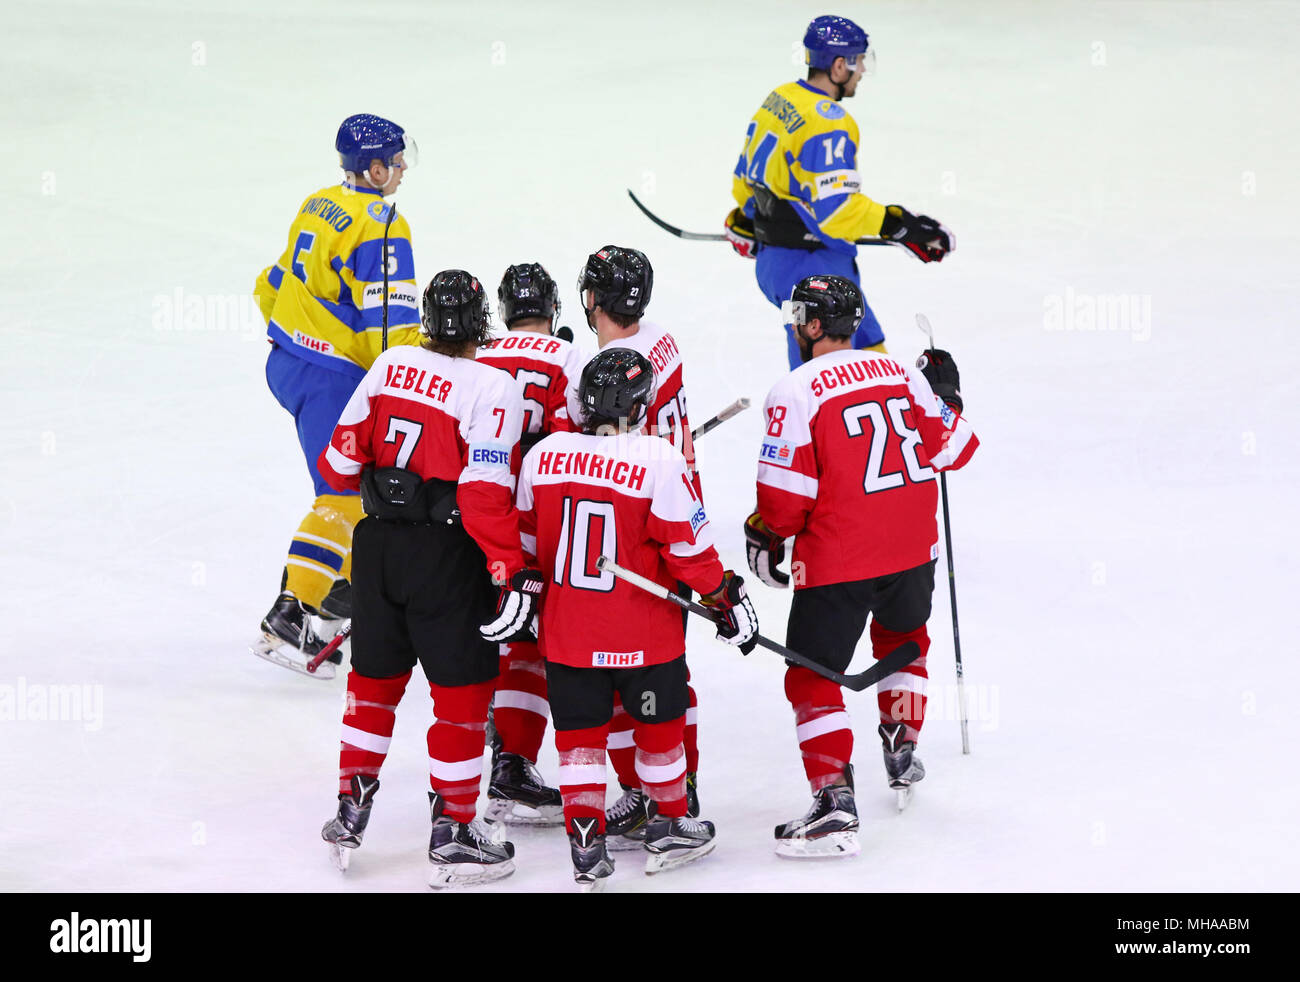 KYIV, UKRAINE - APRIL 25, 2017: Players of Austria National Team react after scored a goal during IIHF 2017 Ice Hockey World Championship Div 1 Group  Stock Photo